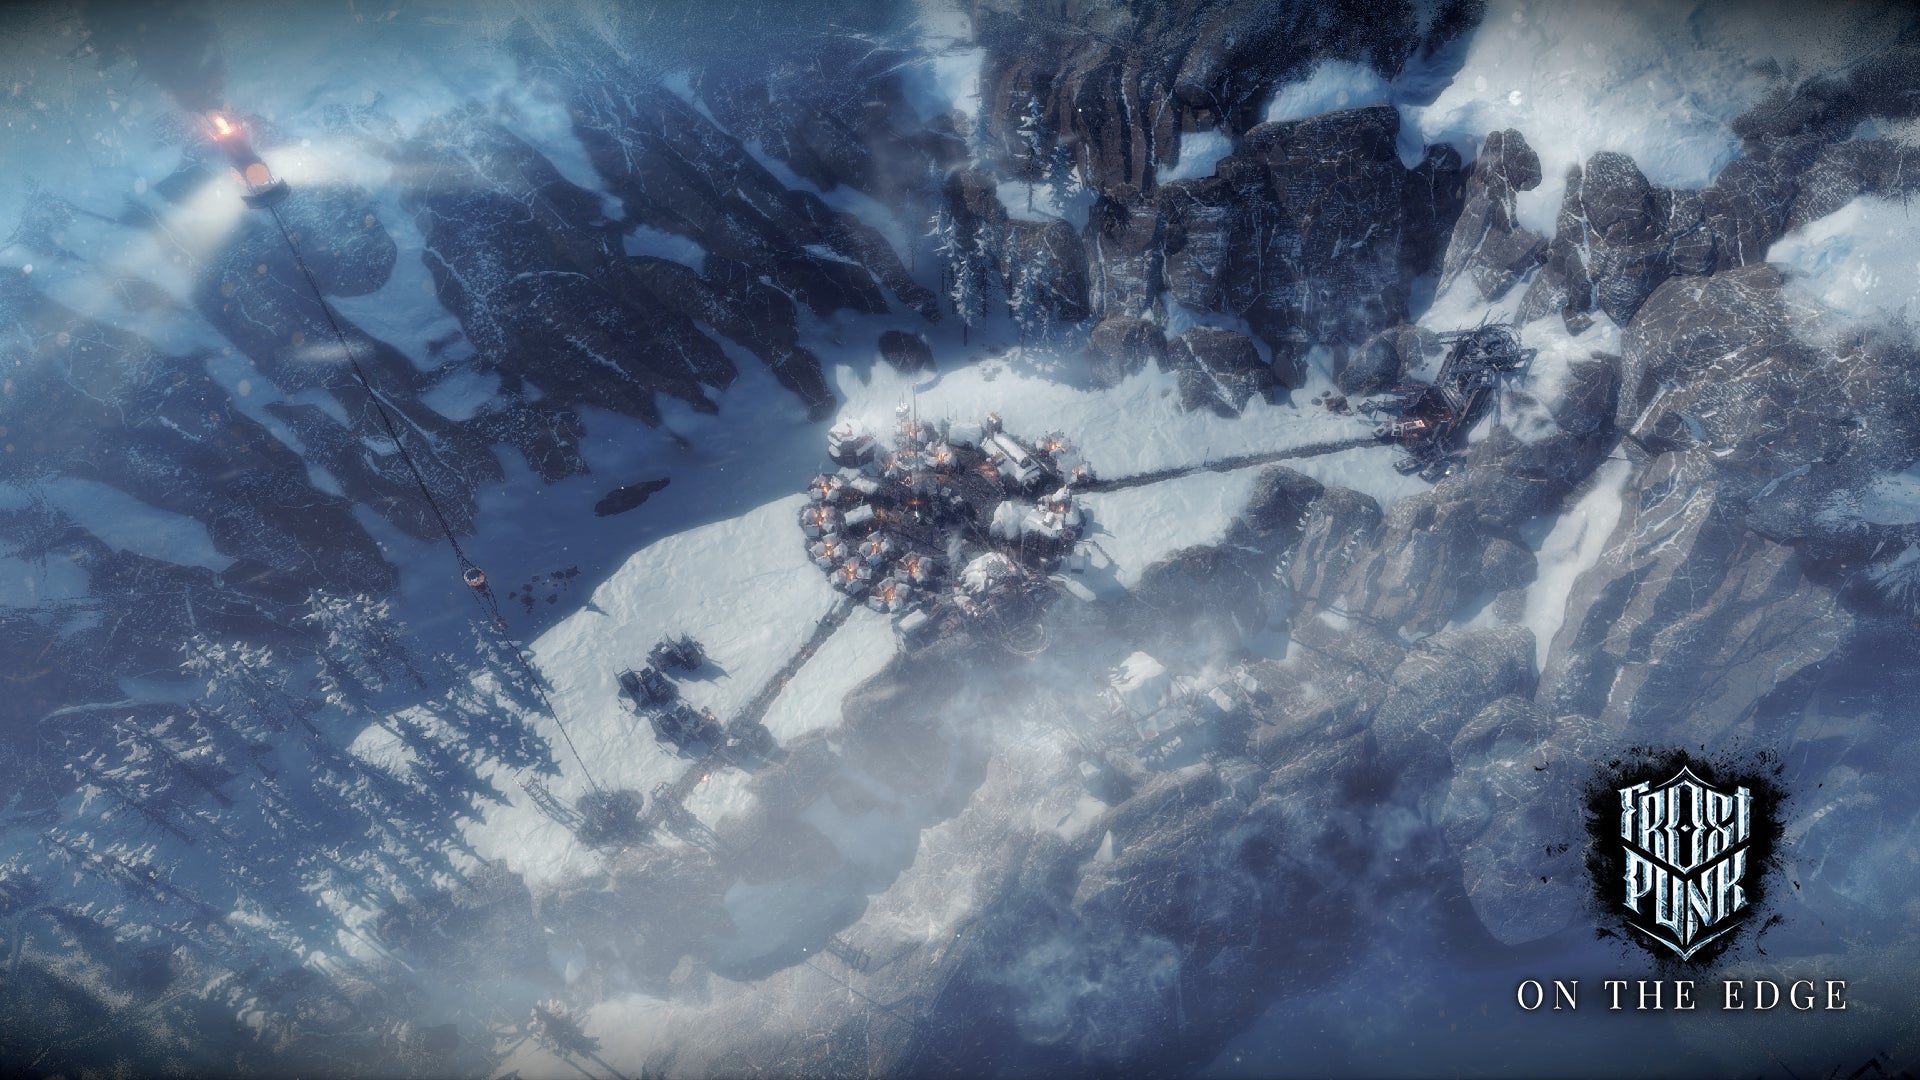 Image for Frostpunk's final DLC On the Edge will be released August 20